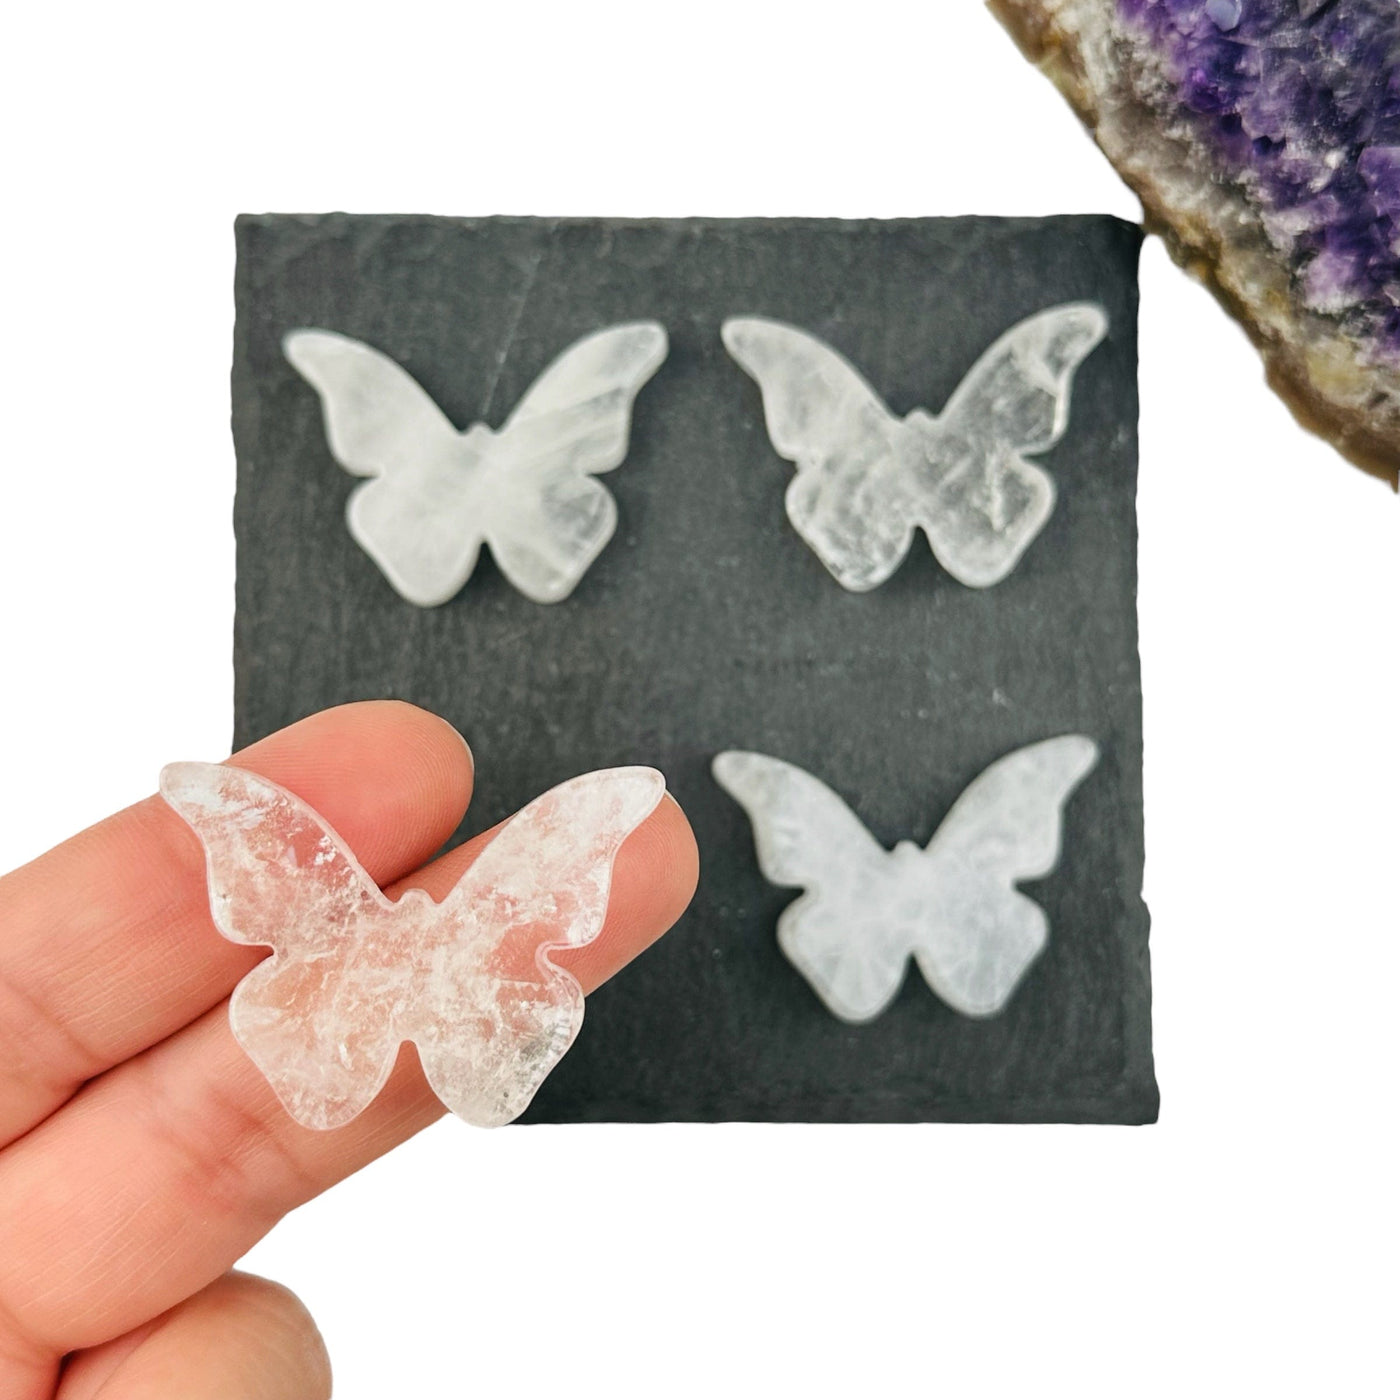 crystal quartz butterfly cabochon in hand for size reference 